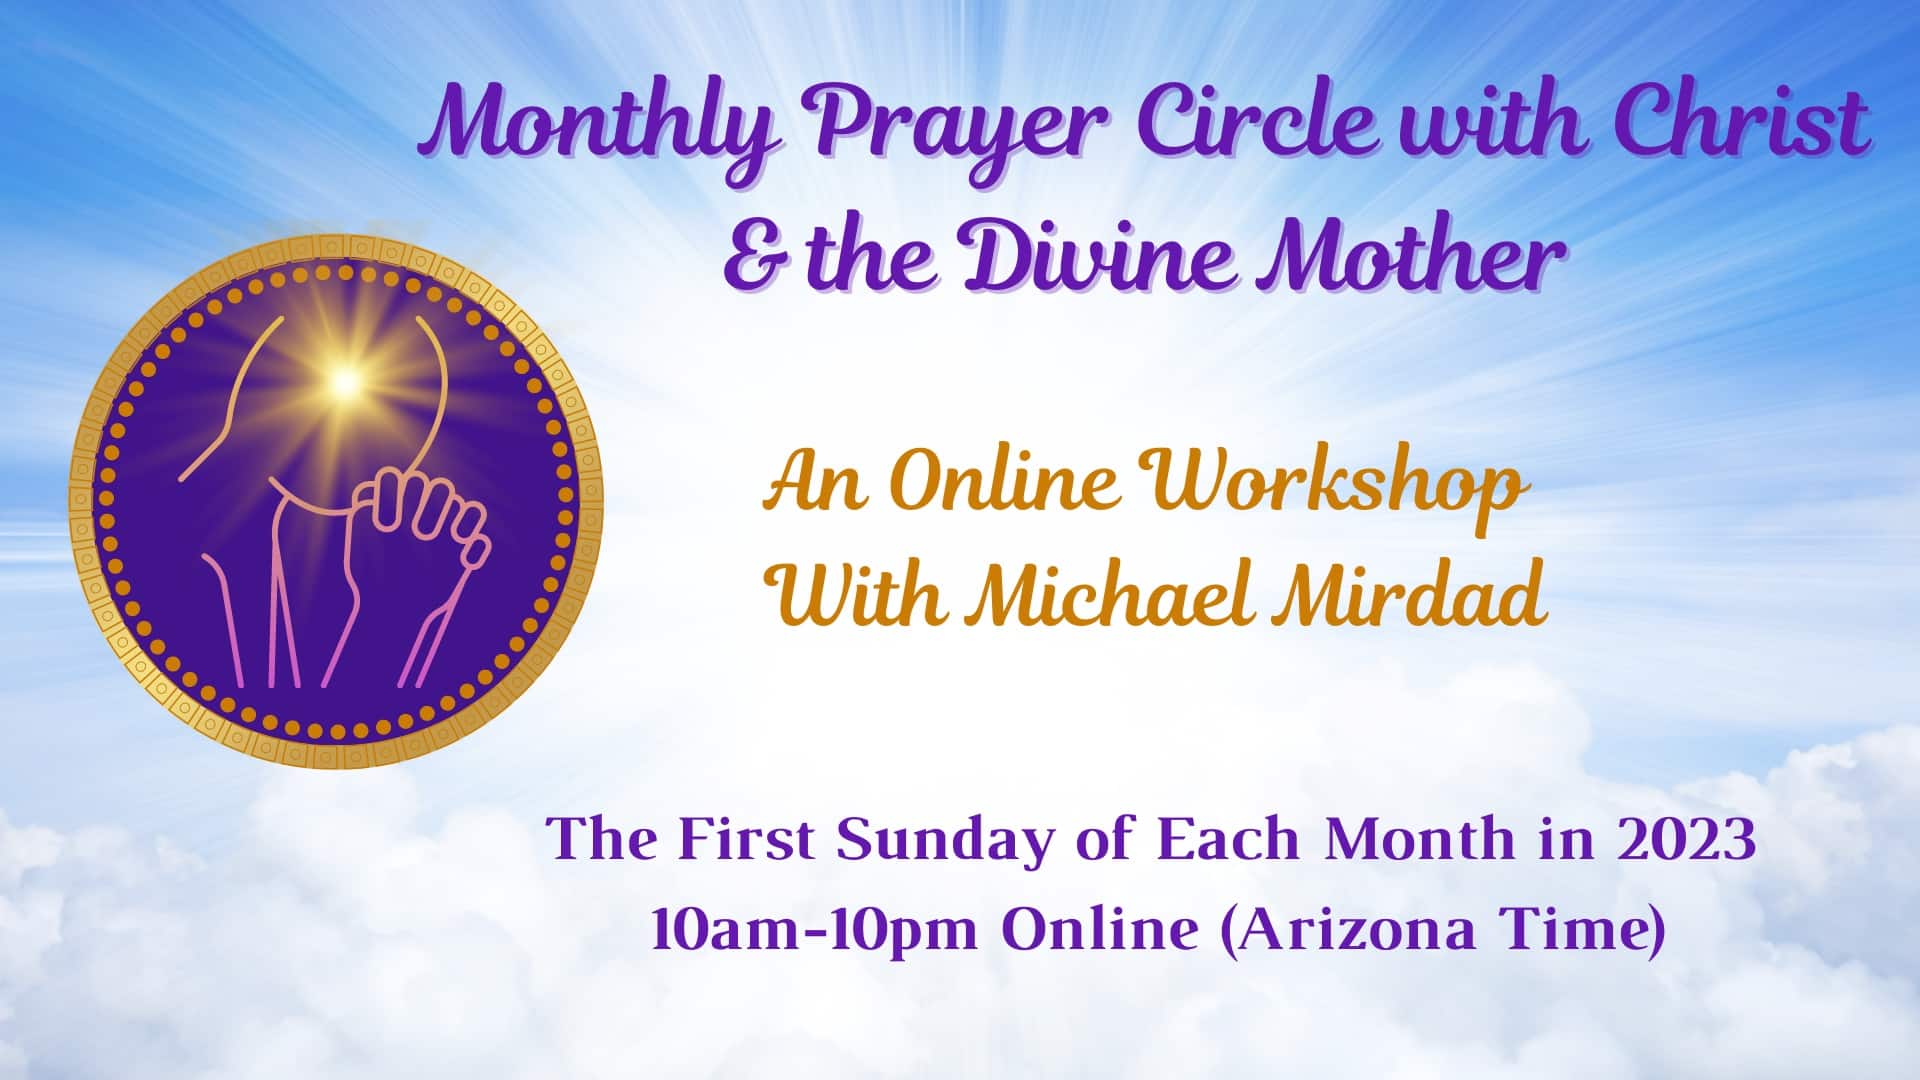 The monthly prayer circle offers spiritual guidance and inner peace with Christ and the Divine Mother.